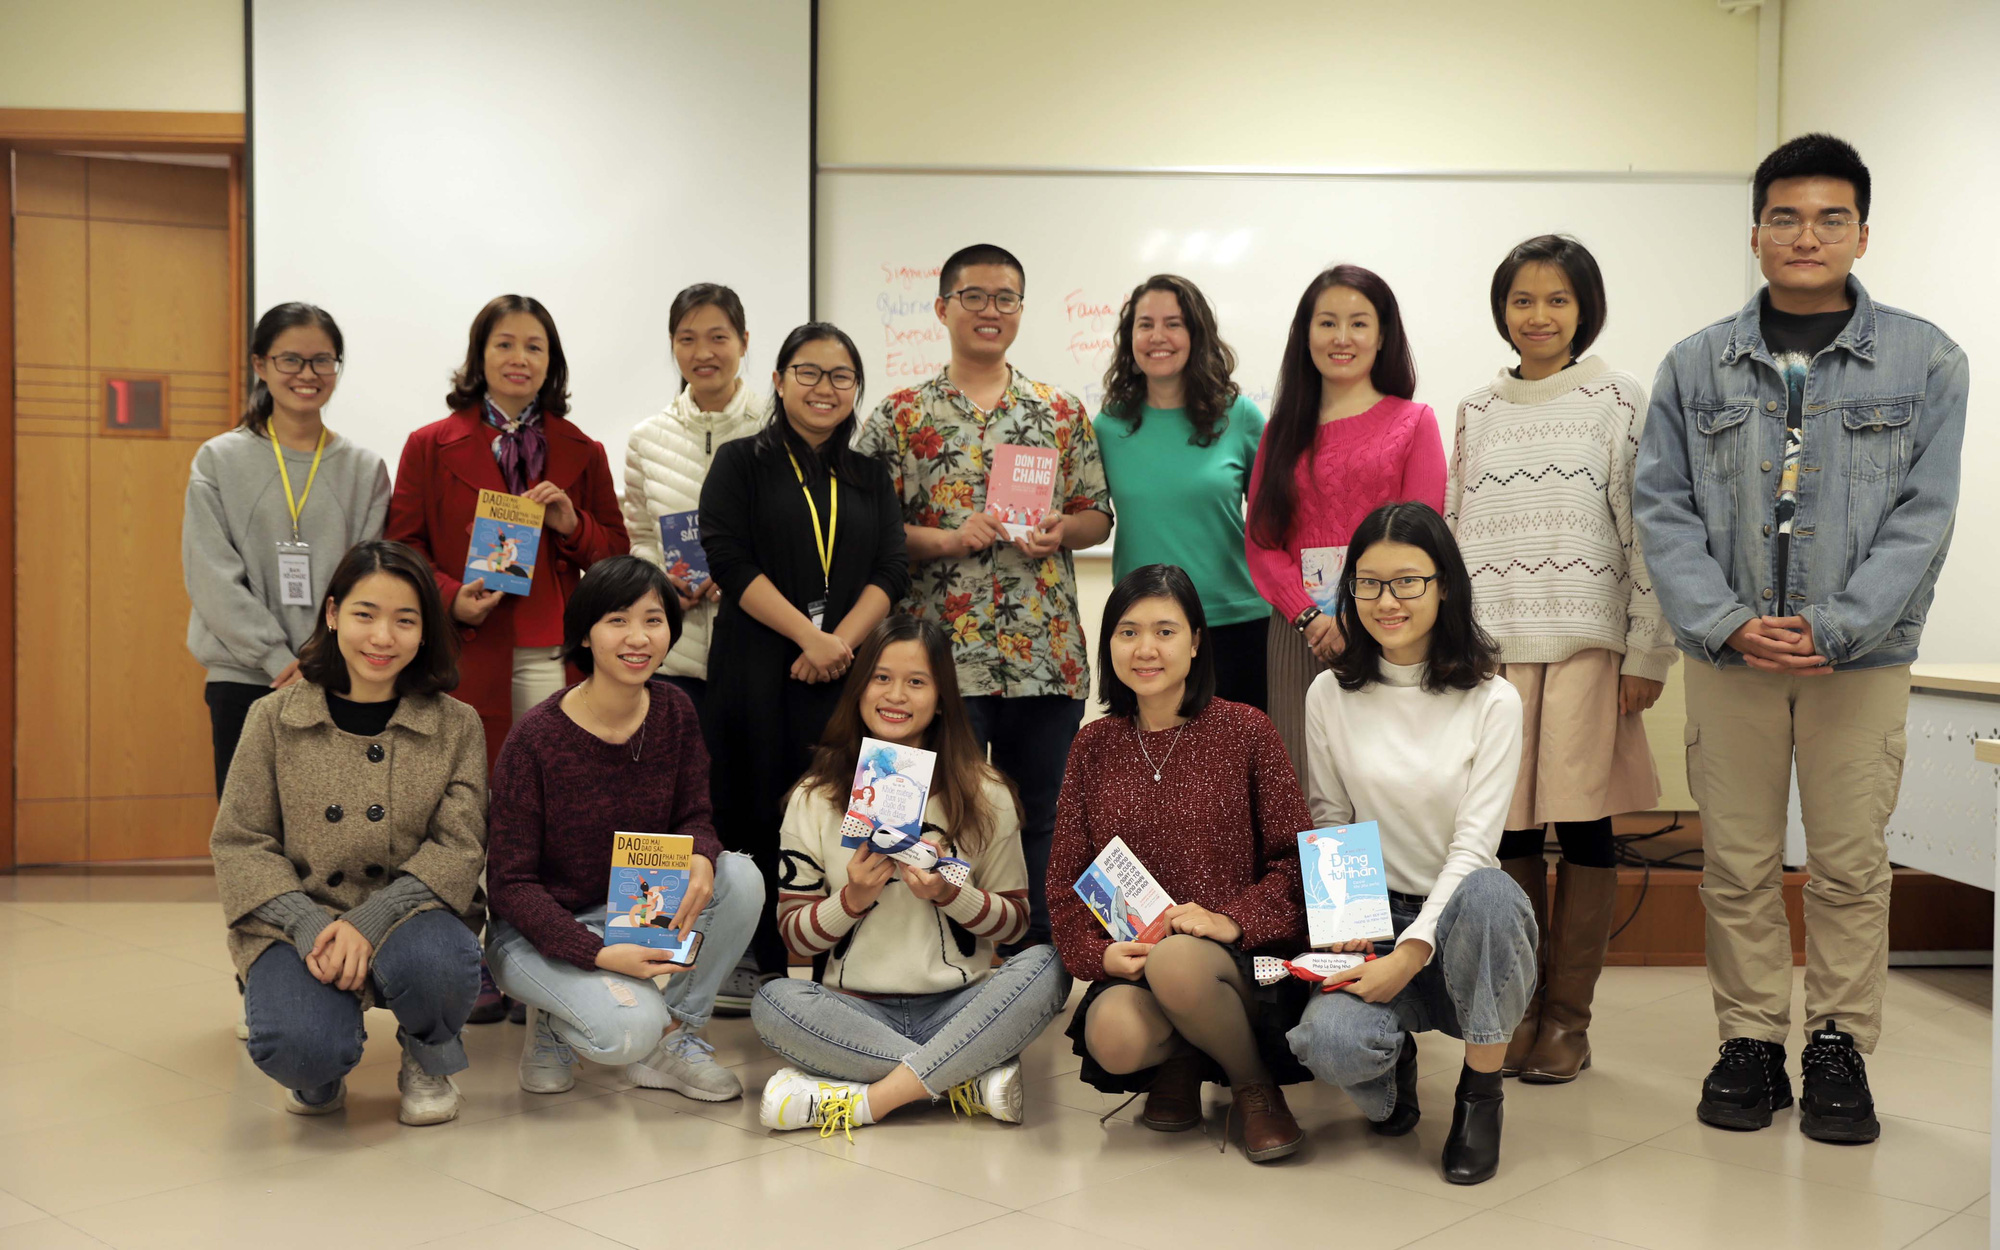 Cao Bao Anh (second row, center) at a seminar titled ‘Suc khoe cam xuc’ (Emotional Health) organized by Oopsy, a Vietnamese psychology group in Hanoi, Vietnam in January, 2020 in this photo provided by Oopsy.